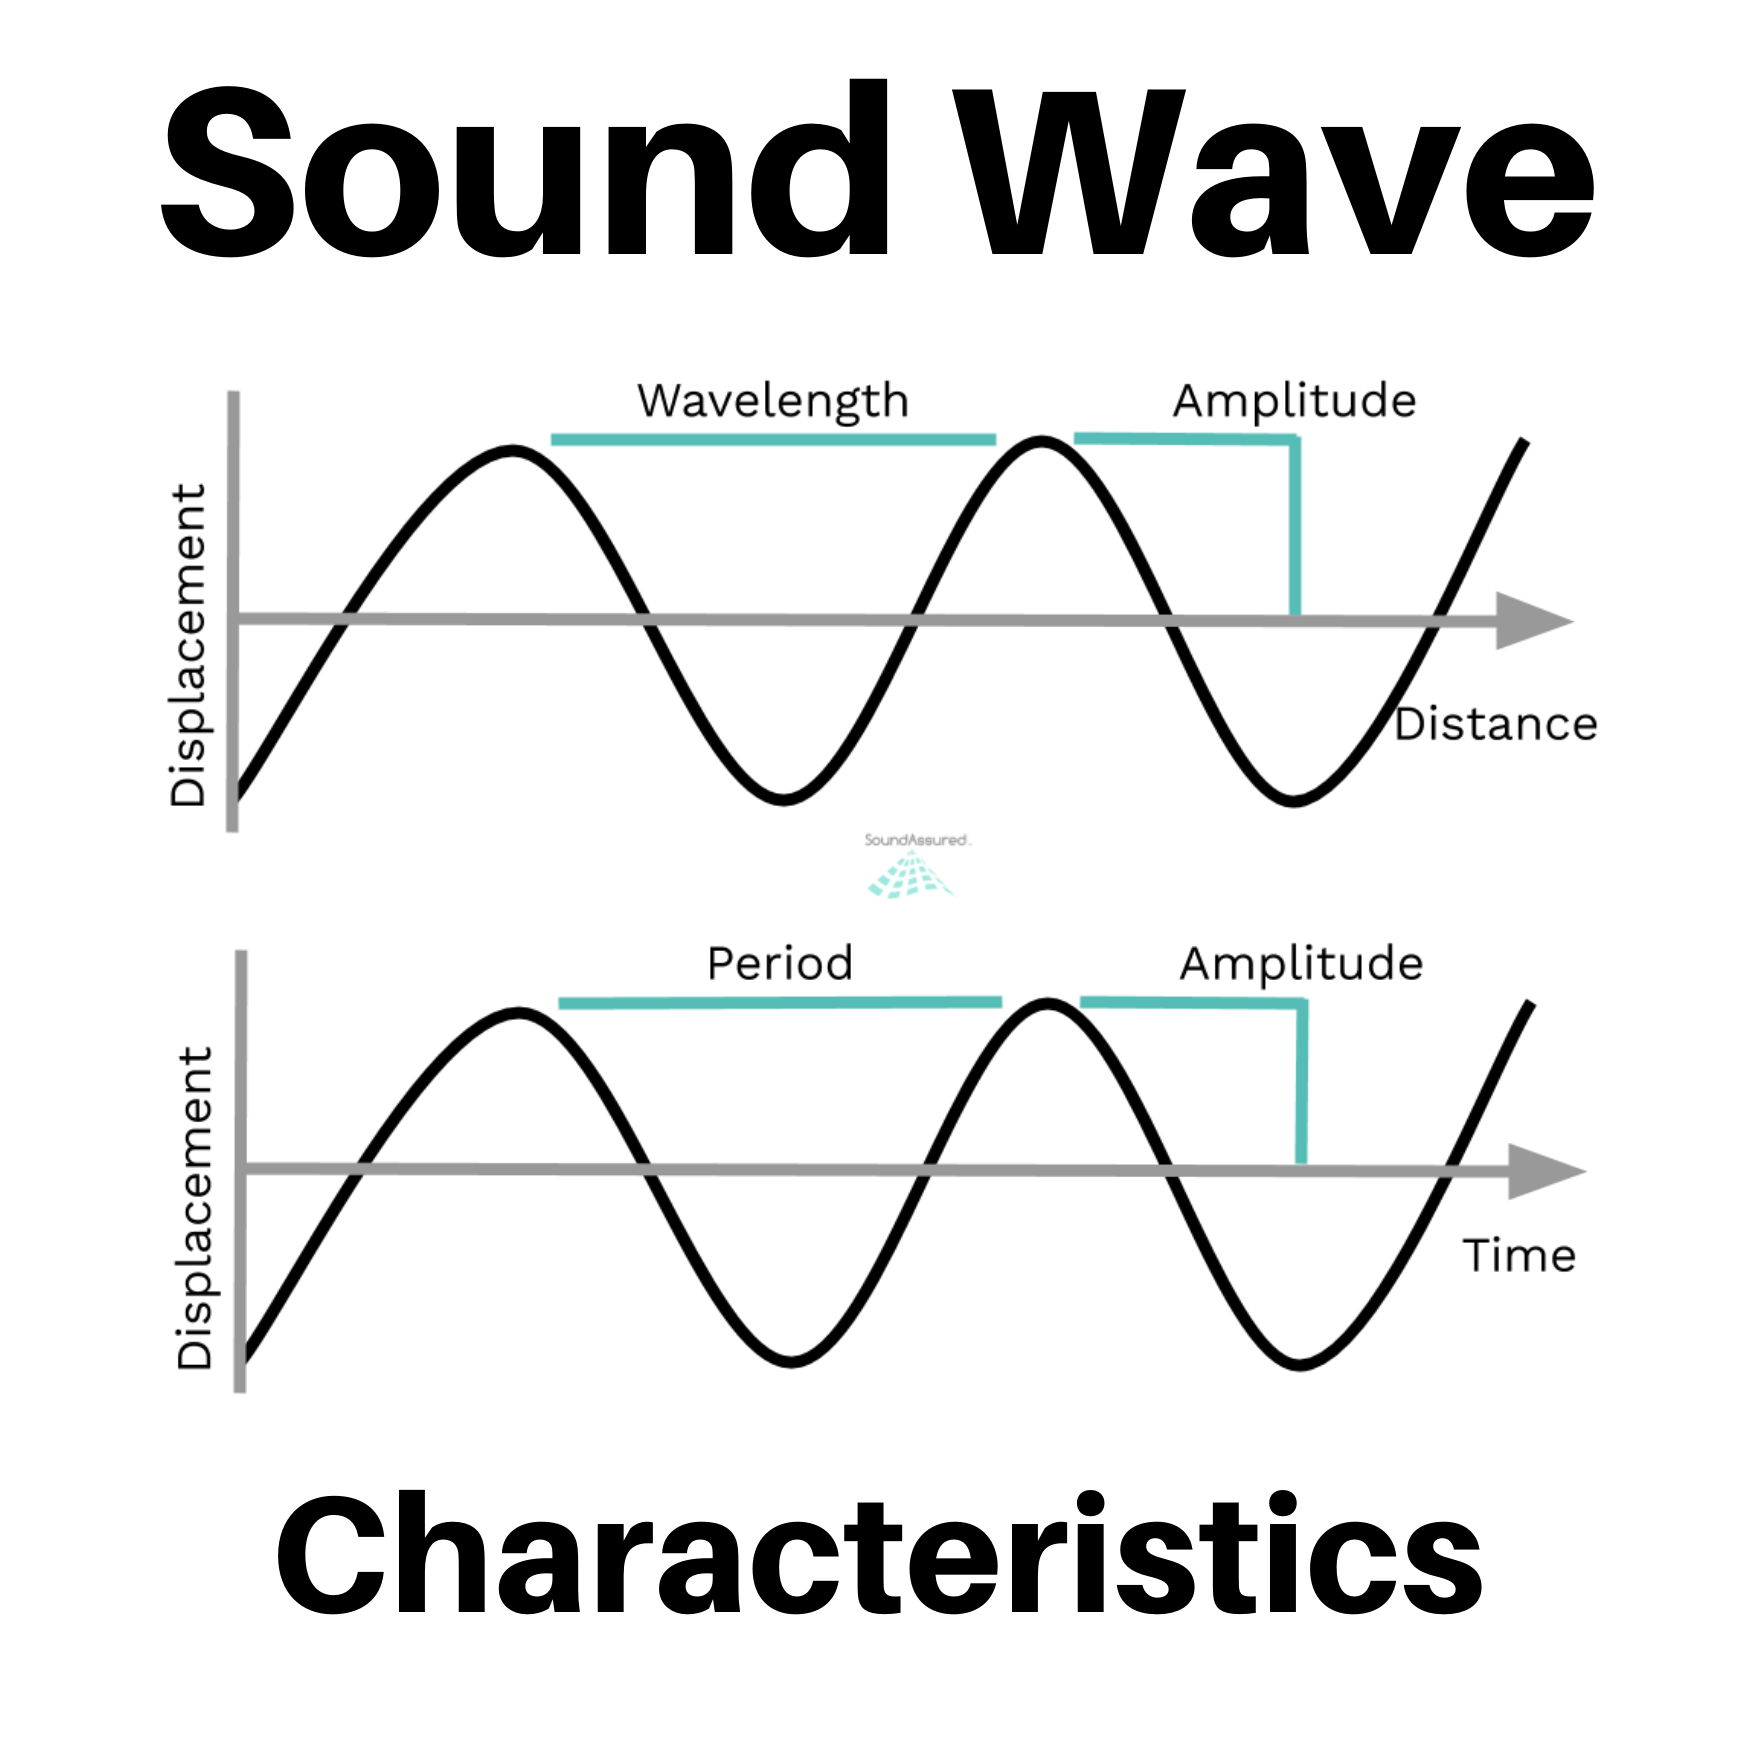 The Basics of Sound: What are Frequency and Amplitude?